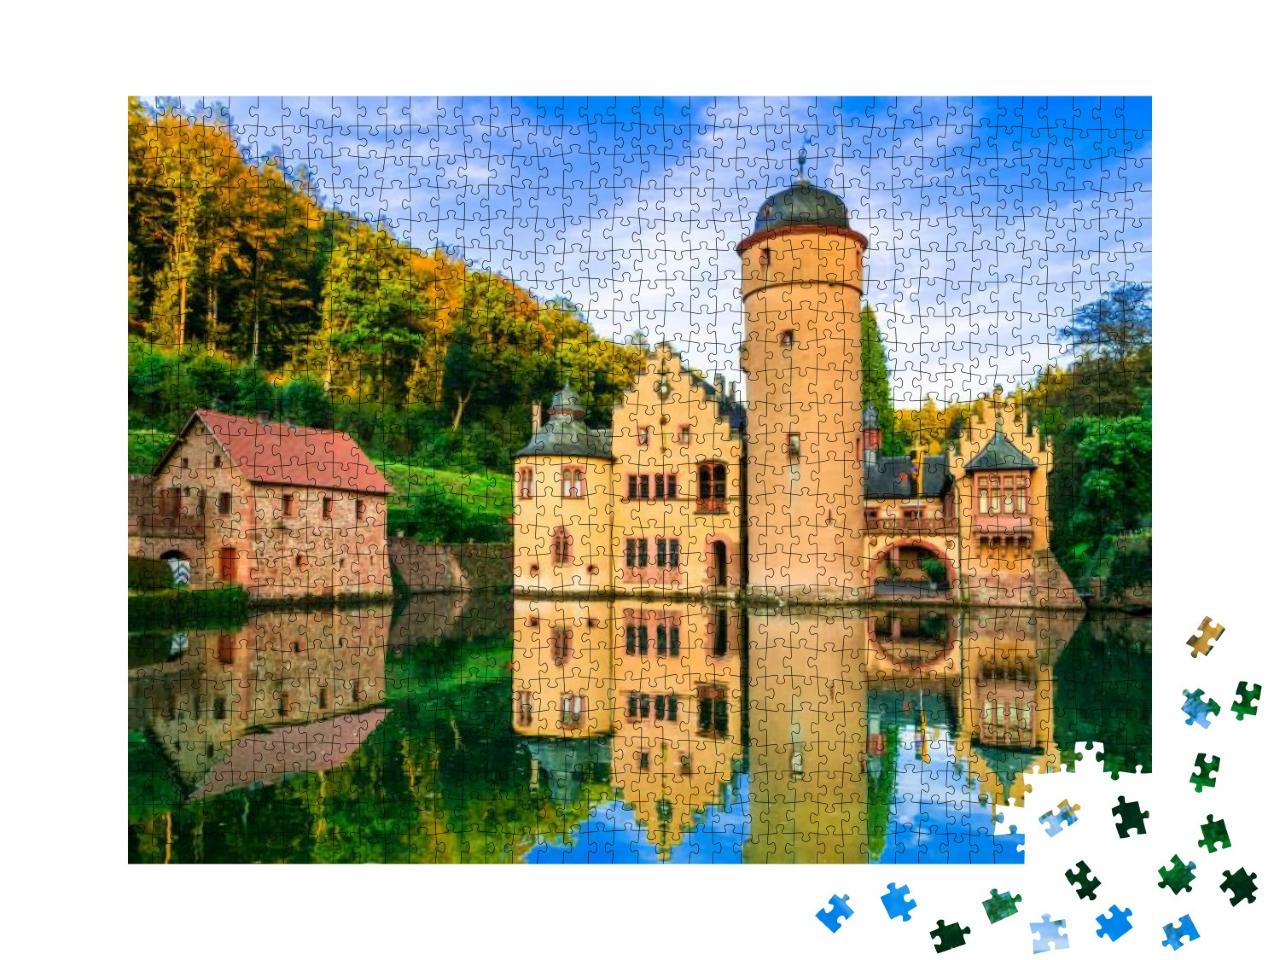 Beautiful Romantic Castle Mespelbrunn in Germany... Jigsaw Puzzle with 1000 pieces